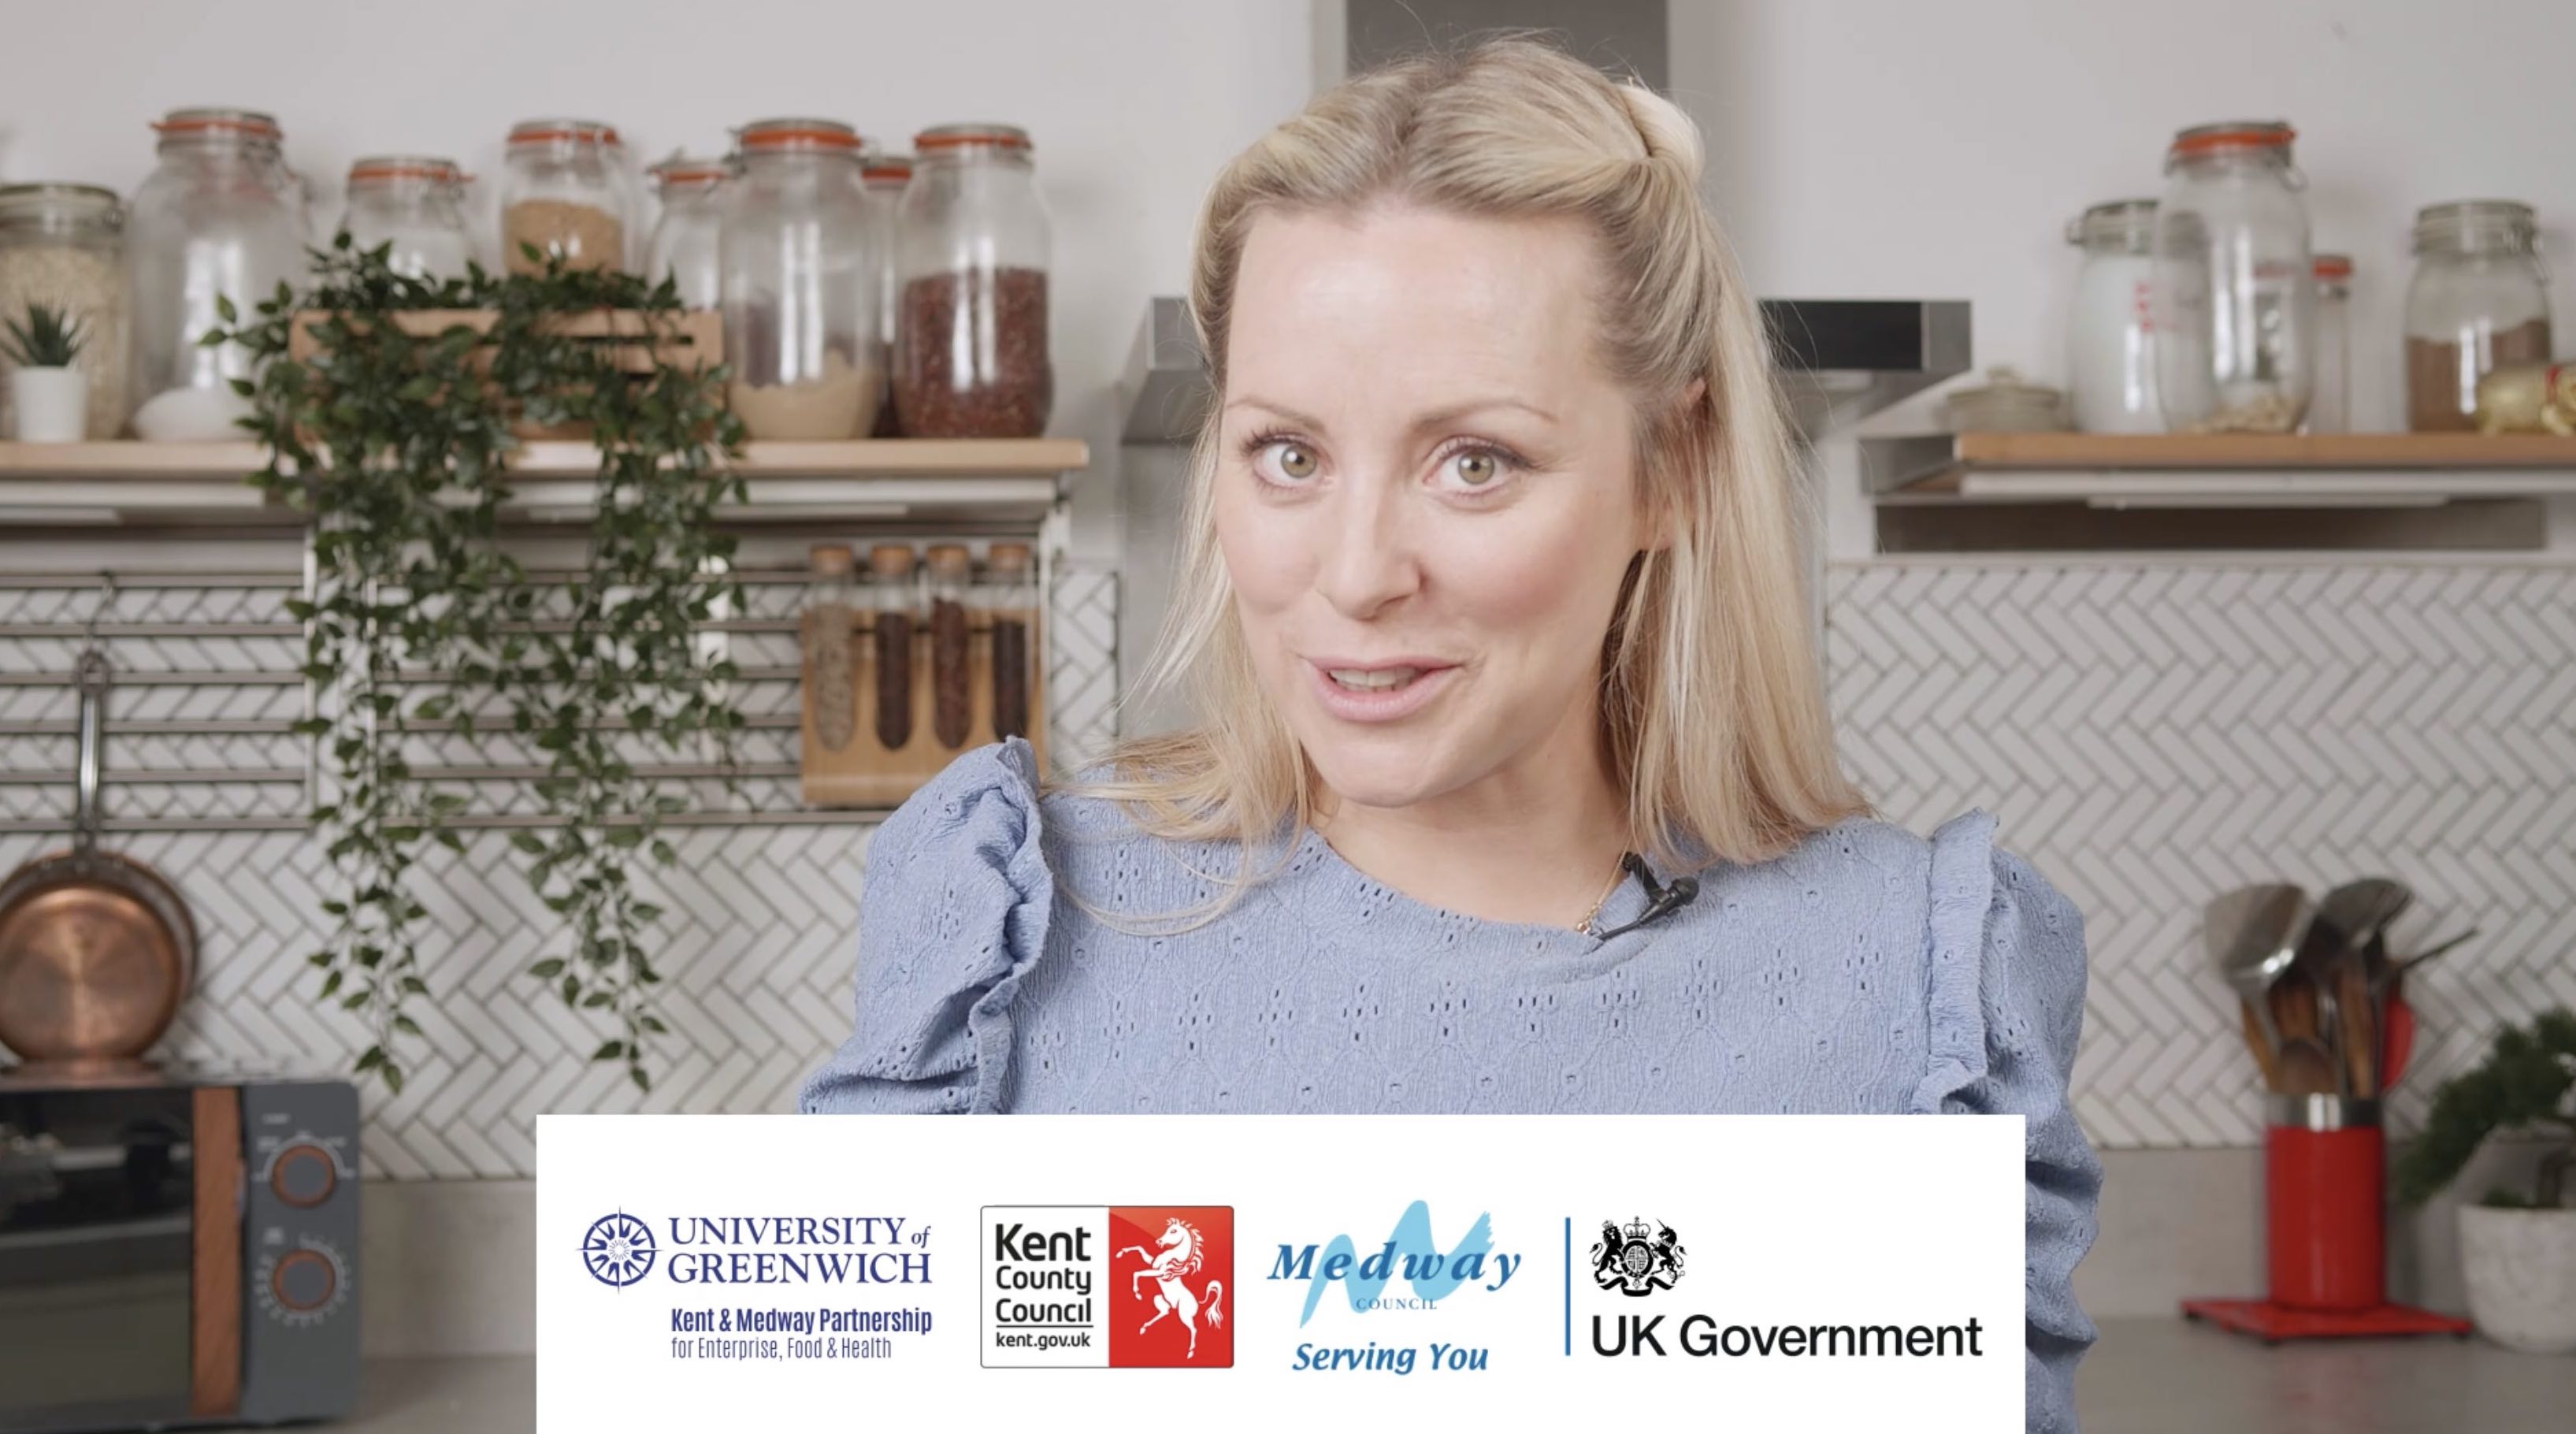 TV chef Anna Haugh has joined the University of Greenwich on the ACE Kitchen project